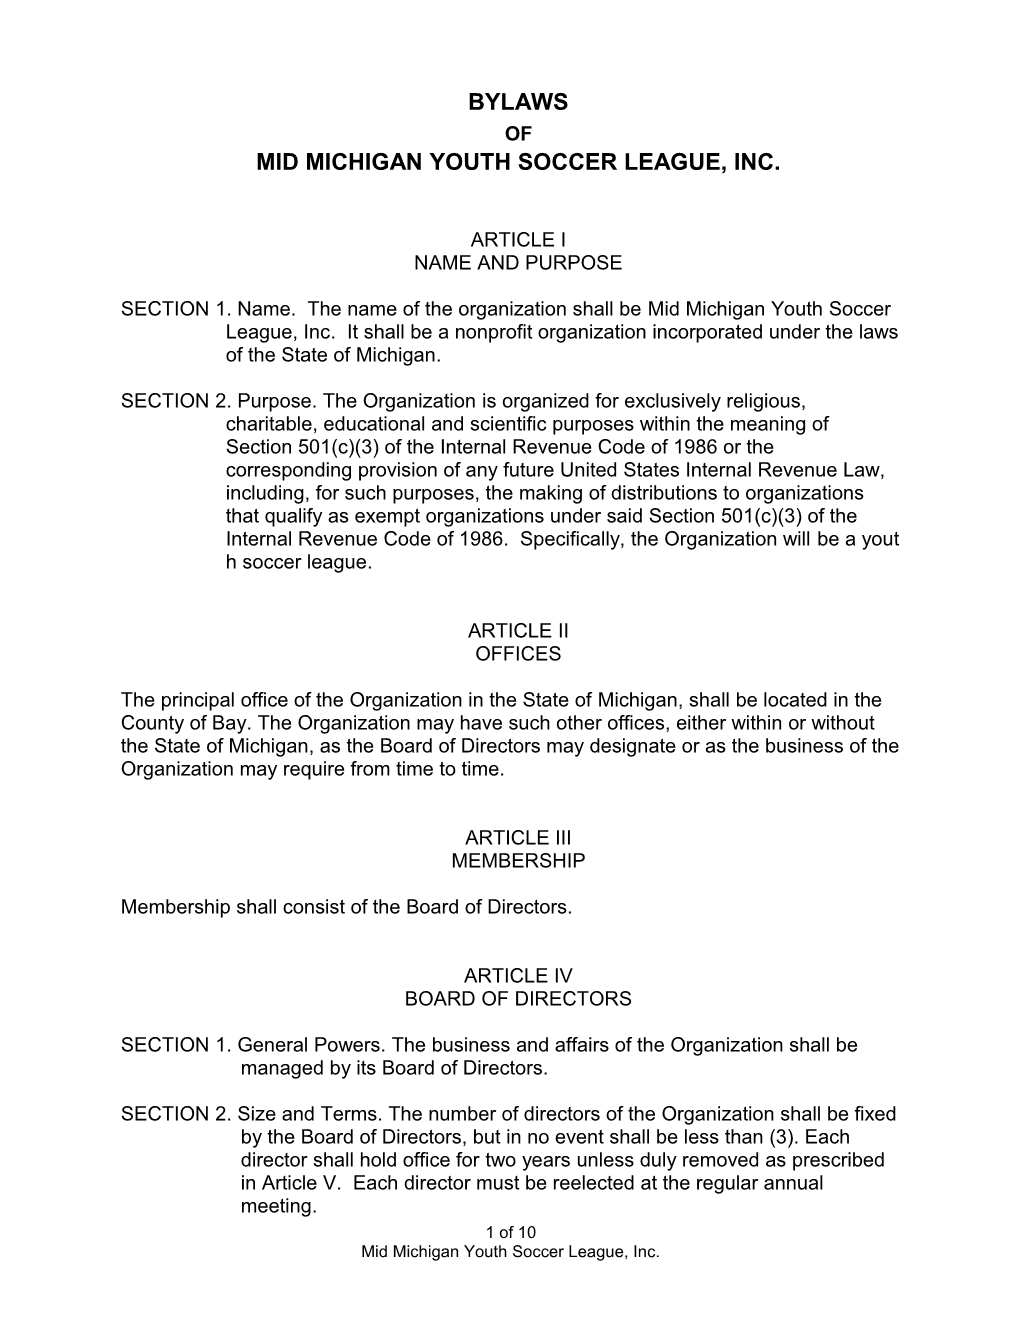 Mid Michigan Youth Soccer League, Inc